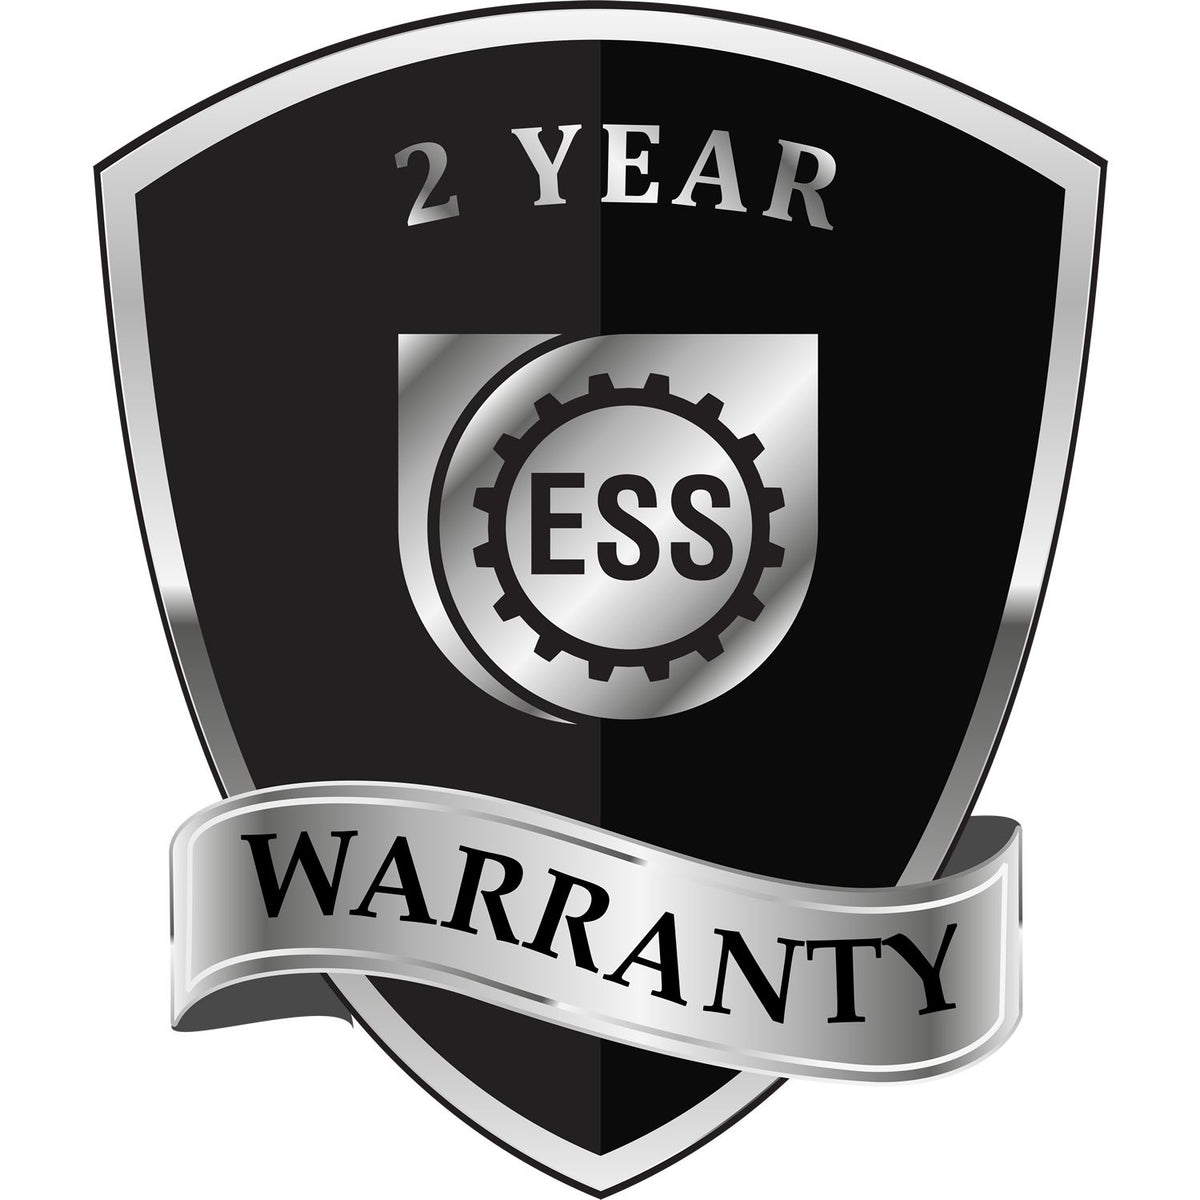 A black and silver badge or emblem showing warranty information for the Nevada Geologist Desk Seal